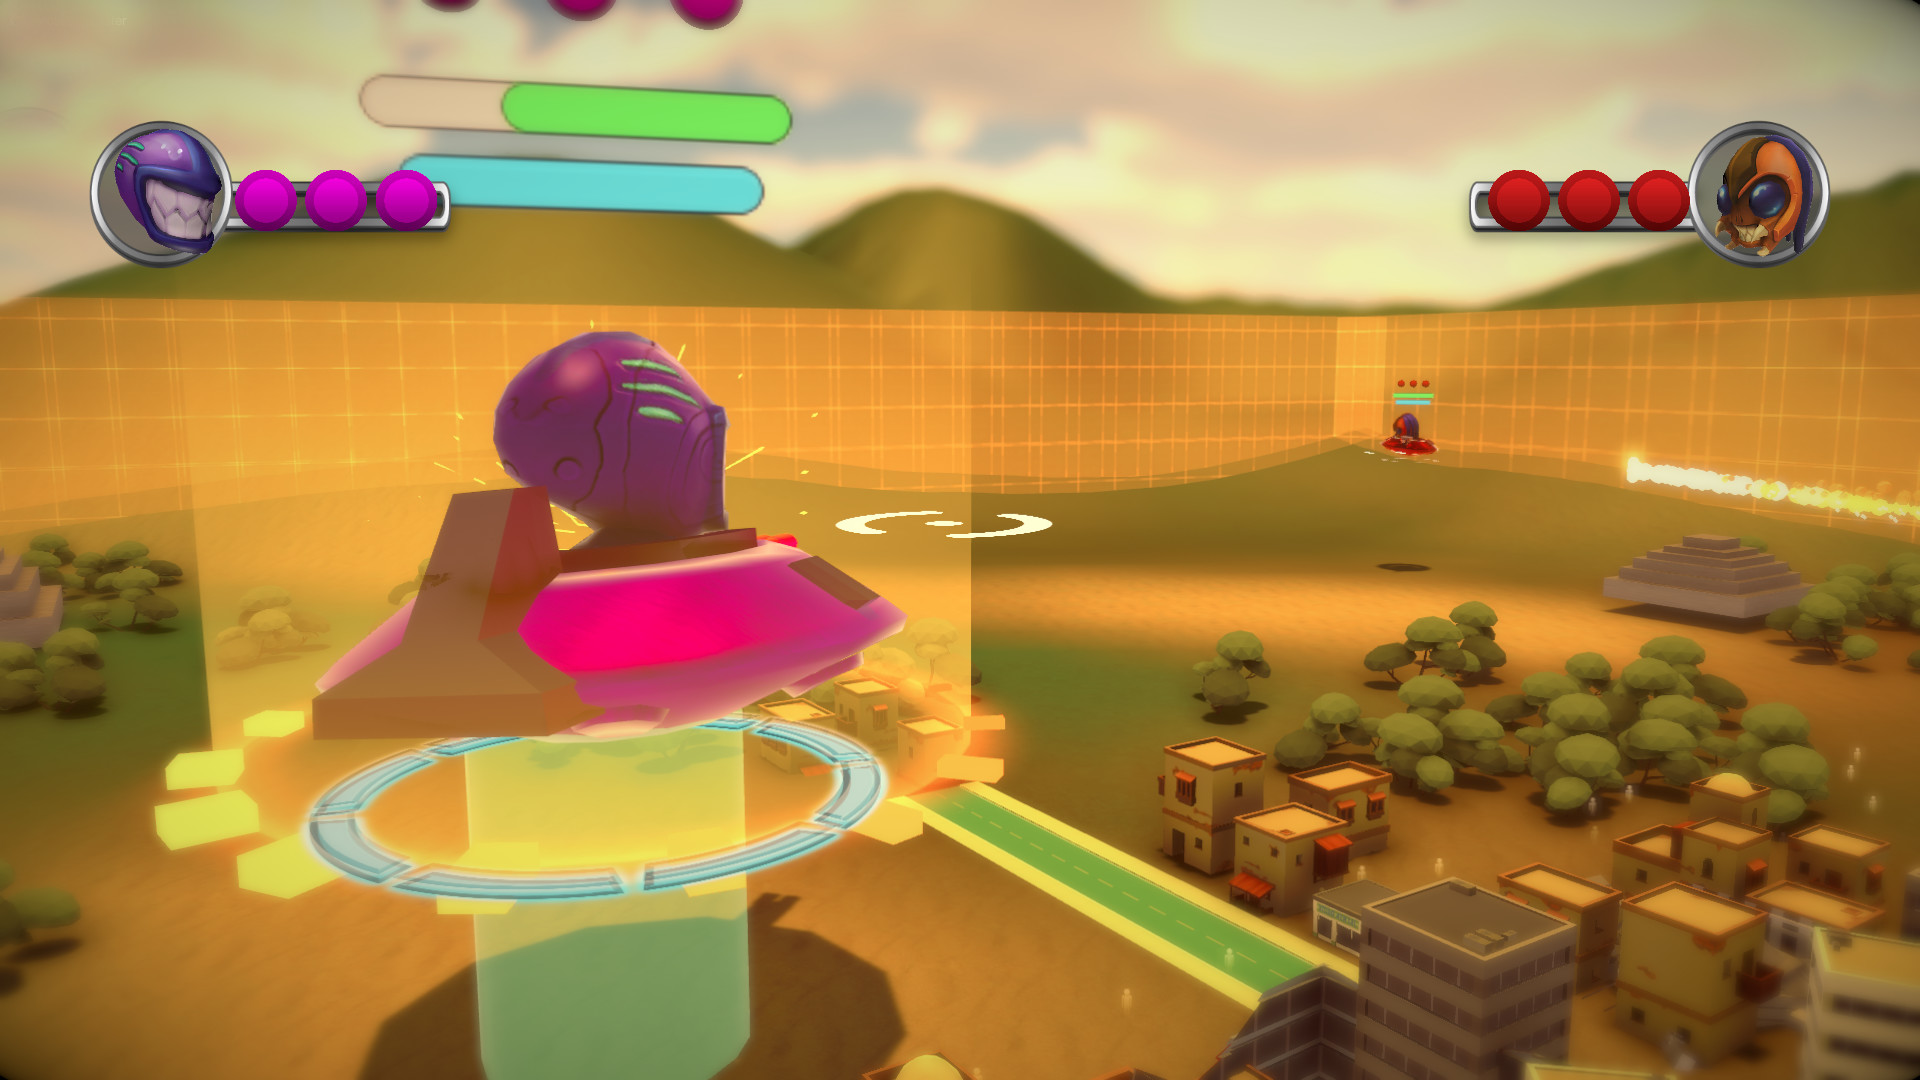 UFO : Brawlers from Beyond Free Download